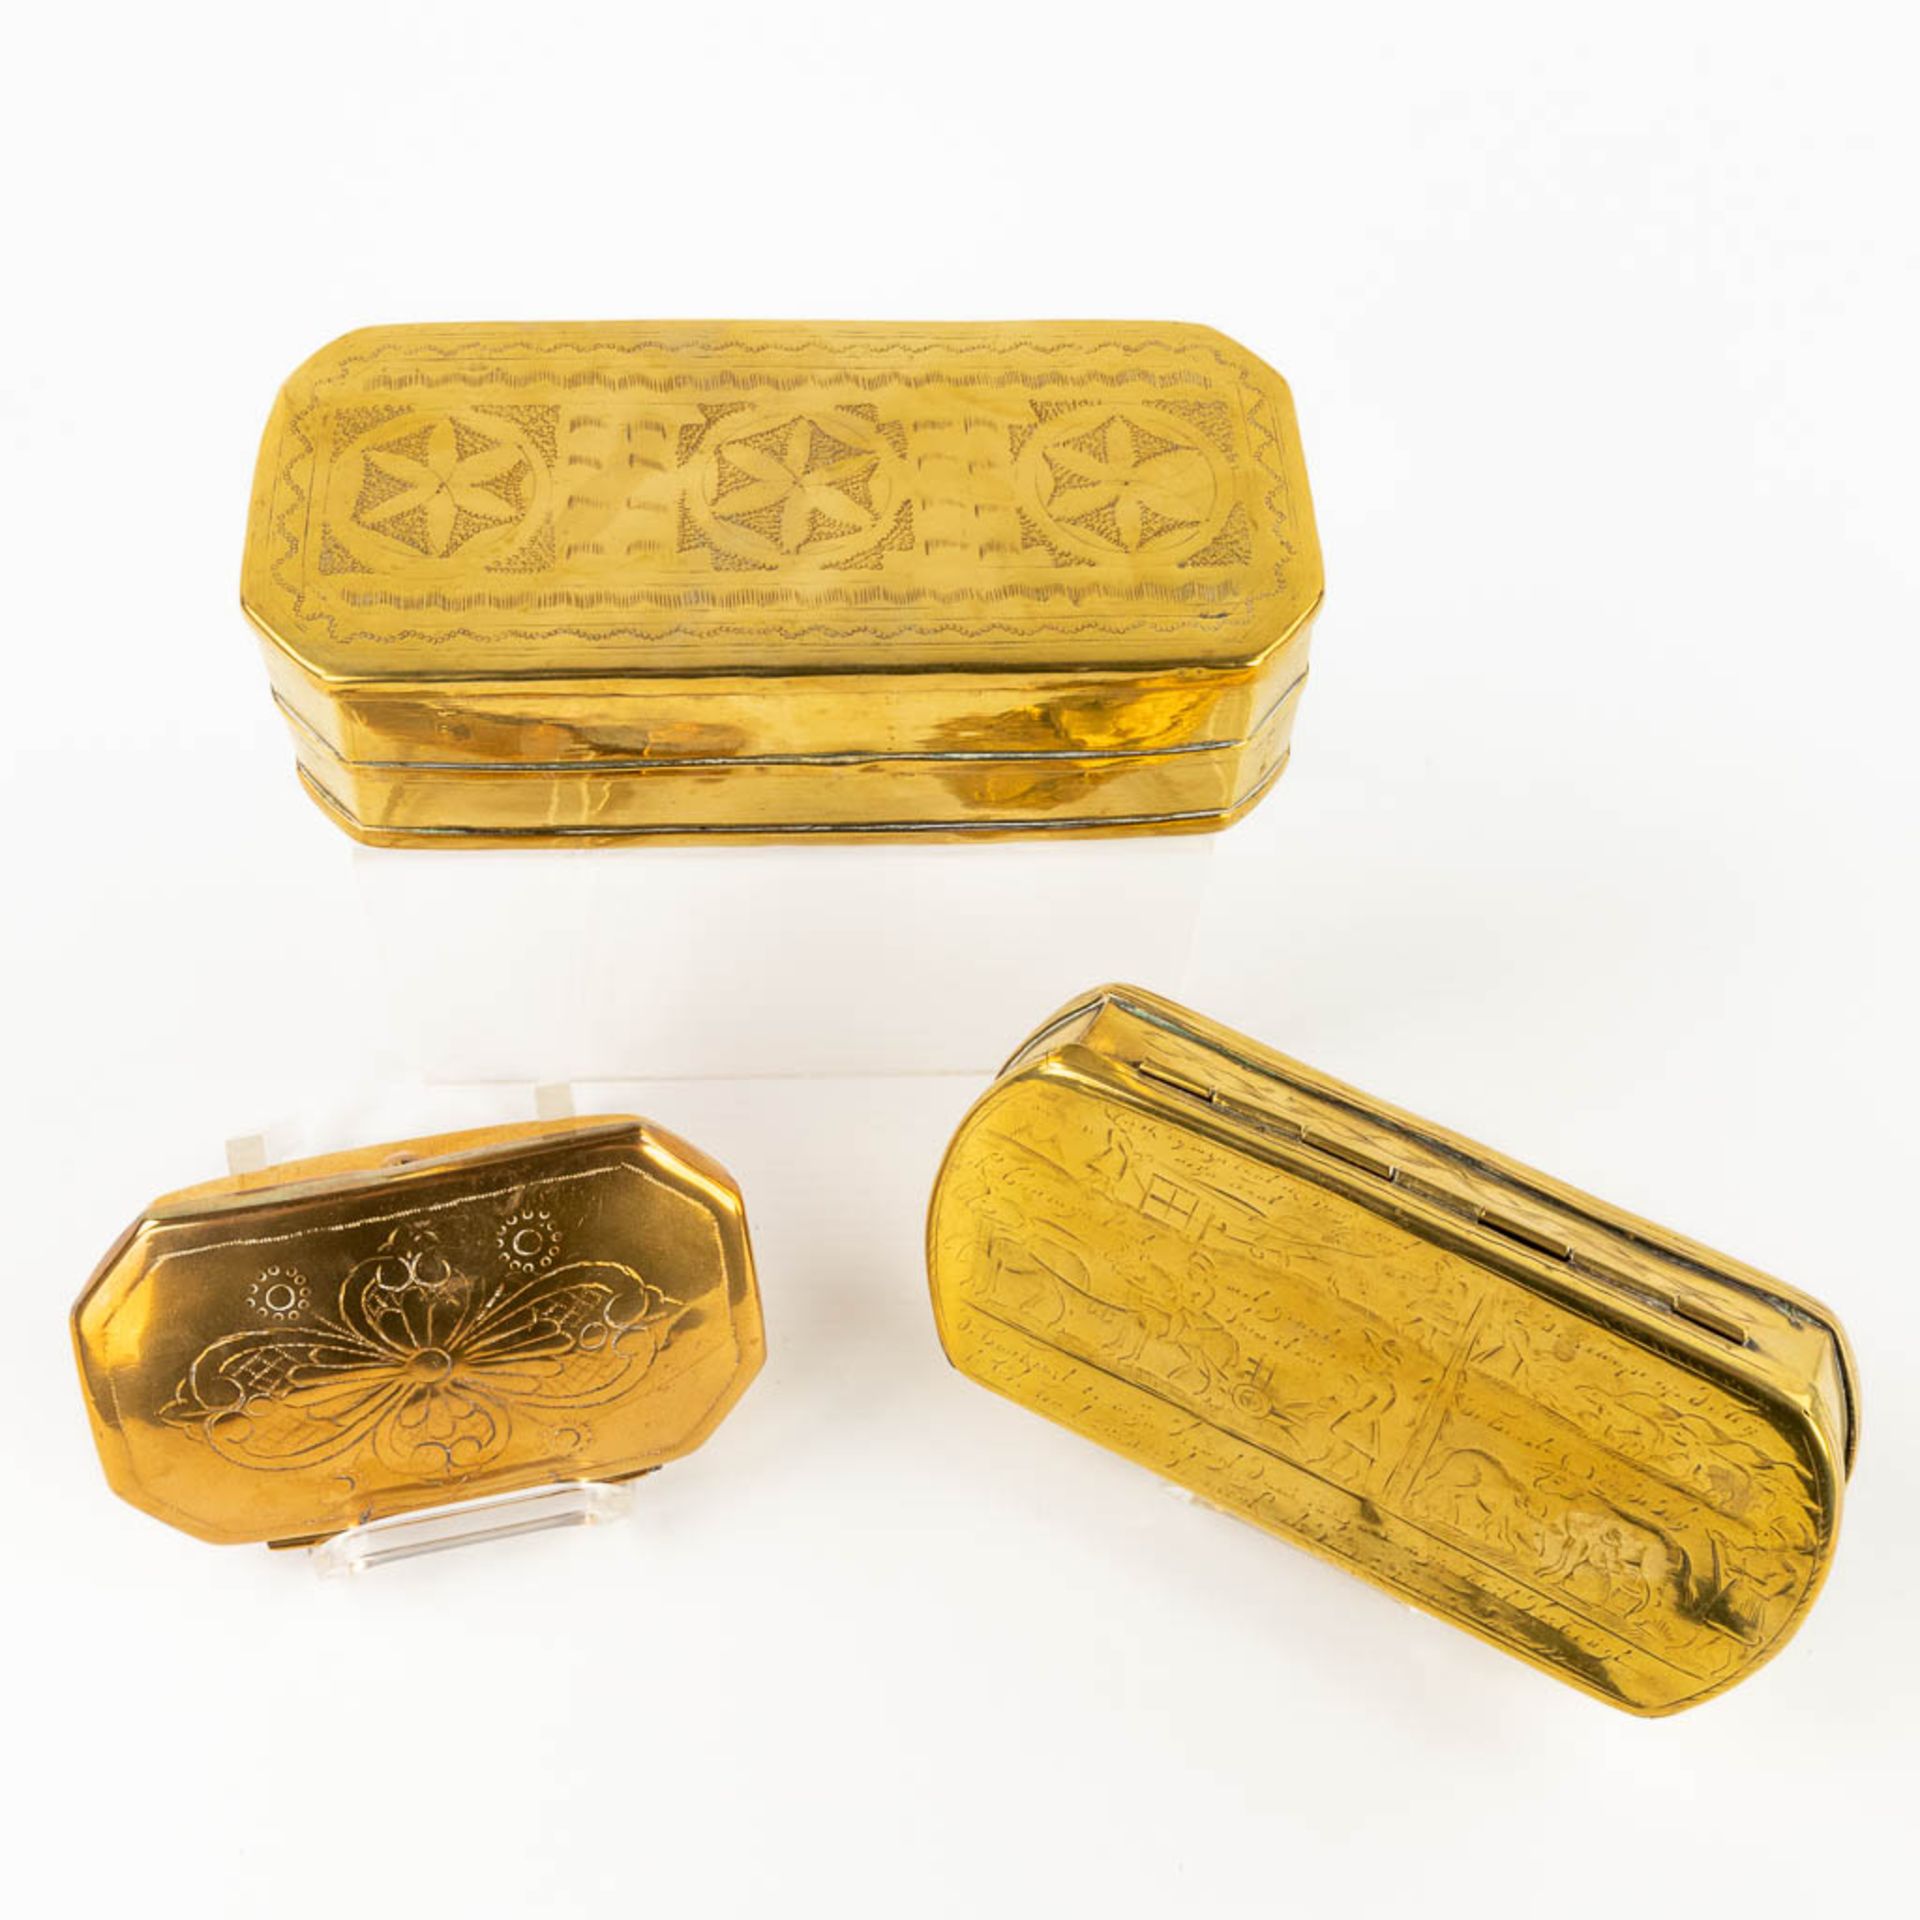 A collection of 3 antique oval tobacco boxes, made of copper. 18th/19th C. (L: 7 x W: 12 x H: 3,5 cm